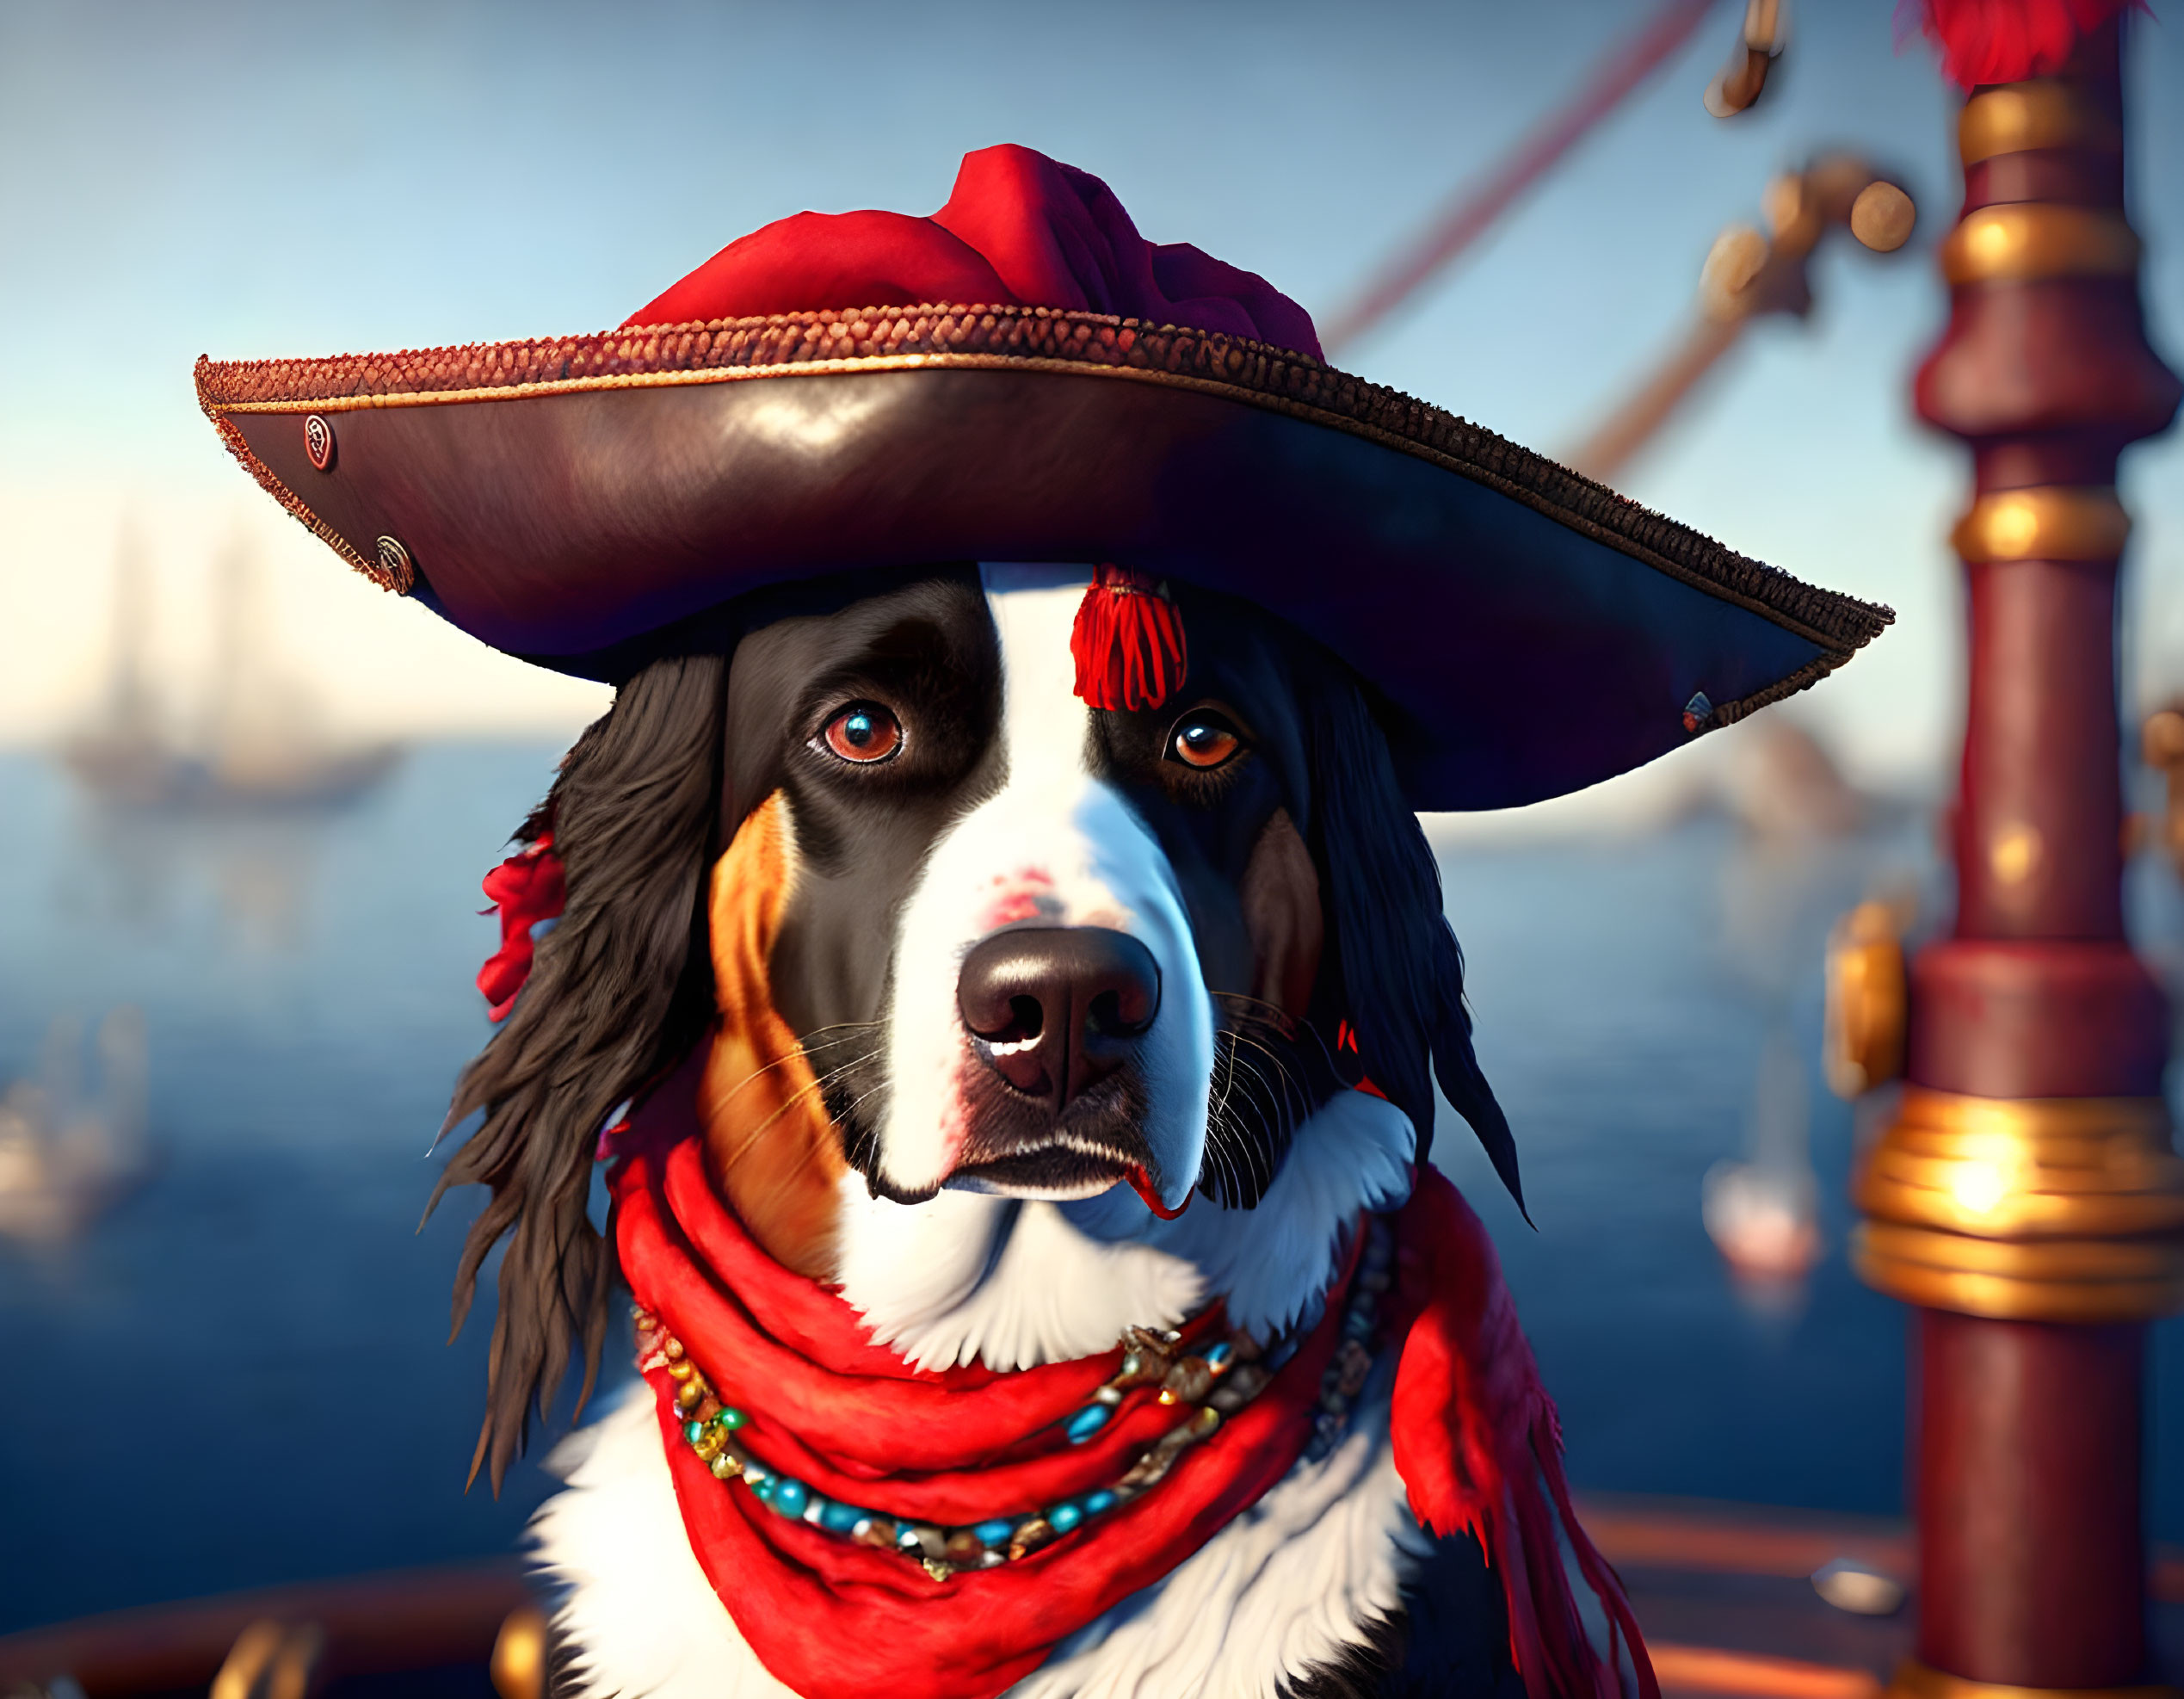 Tricolor-coated dog in pirate costume on ship with blurred maritime backdrop